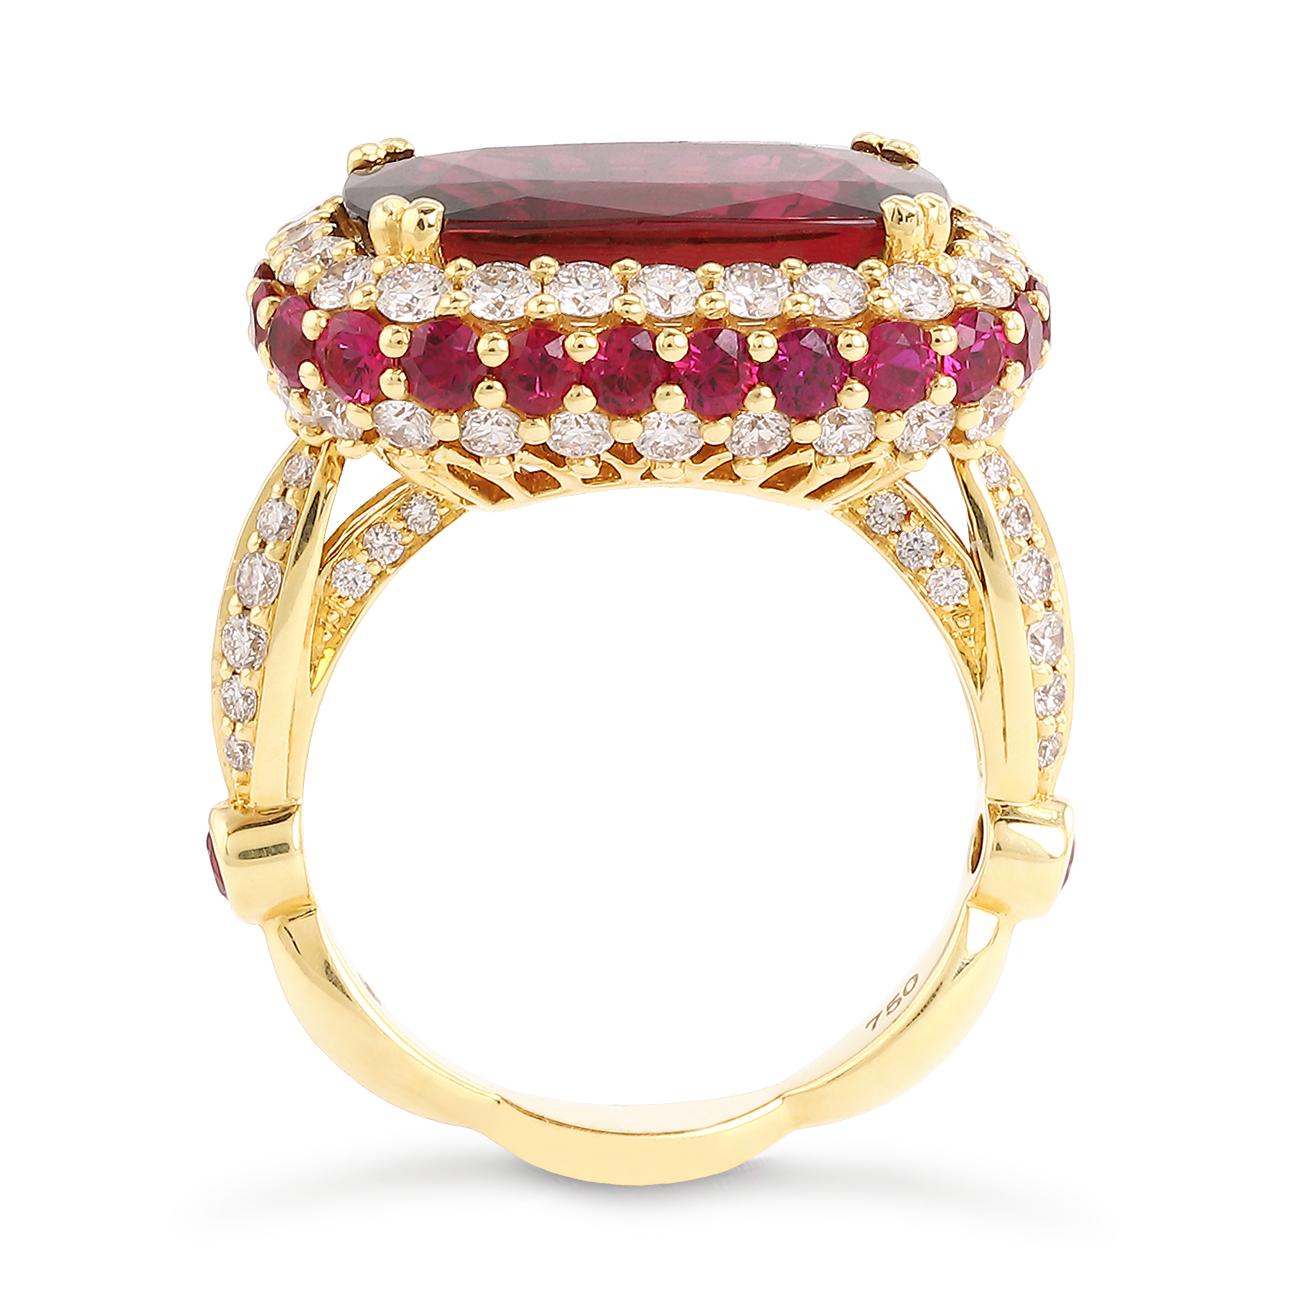 East-west is when this magnificent ruby is placed in an unusual way- horizontal. This gives the ruby a modern and unique look. Meticulously hand-crafted in 18K yellow gold. The natural gem is surrounded by a row of brilliant diamonds. The under